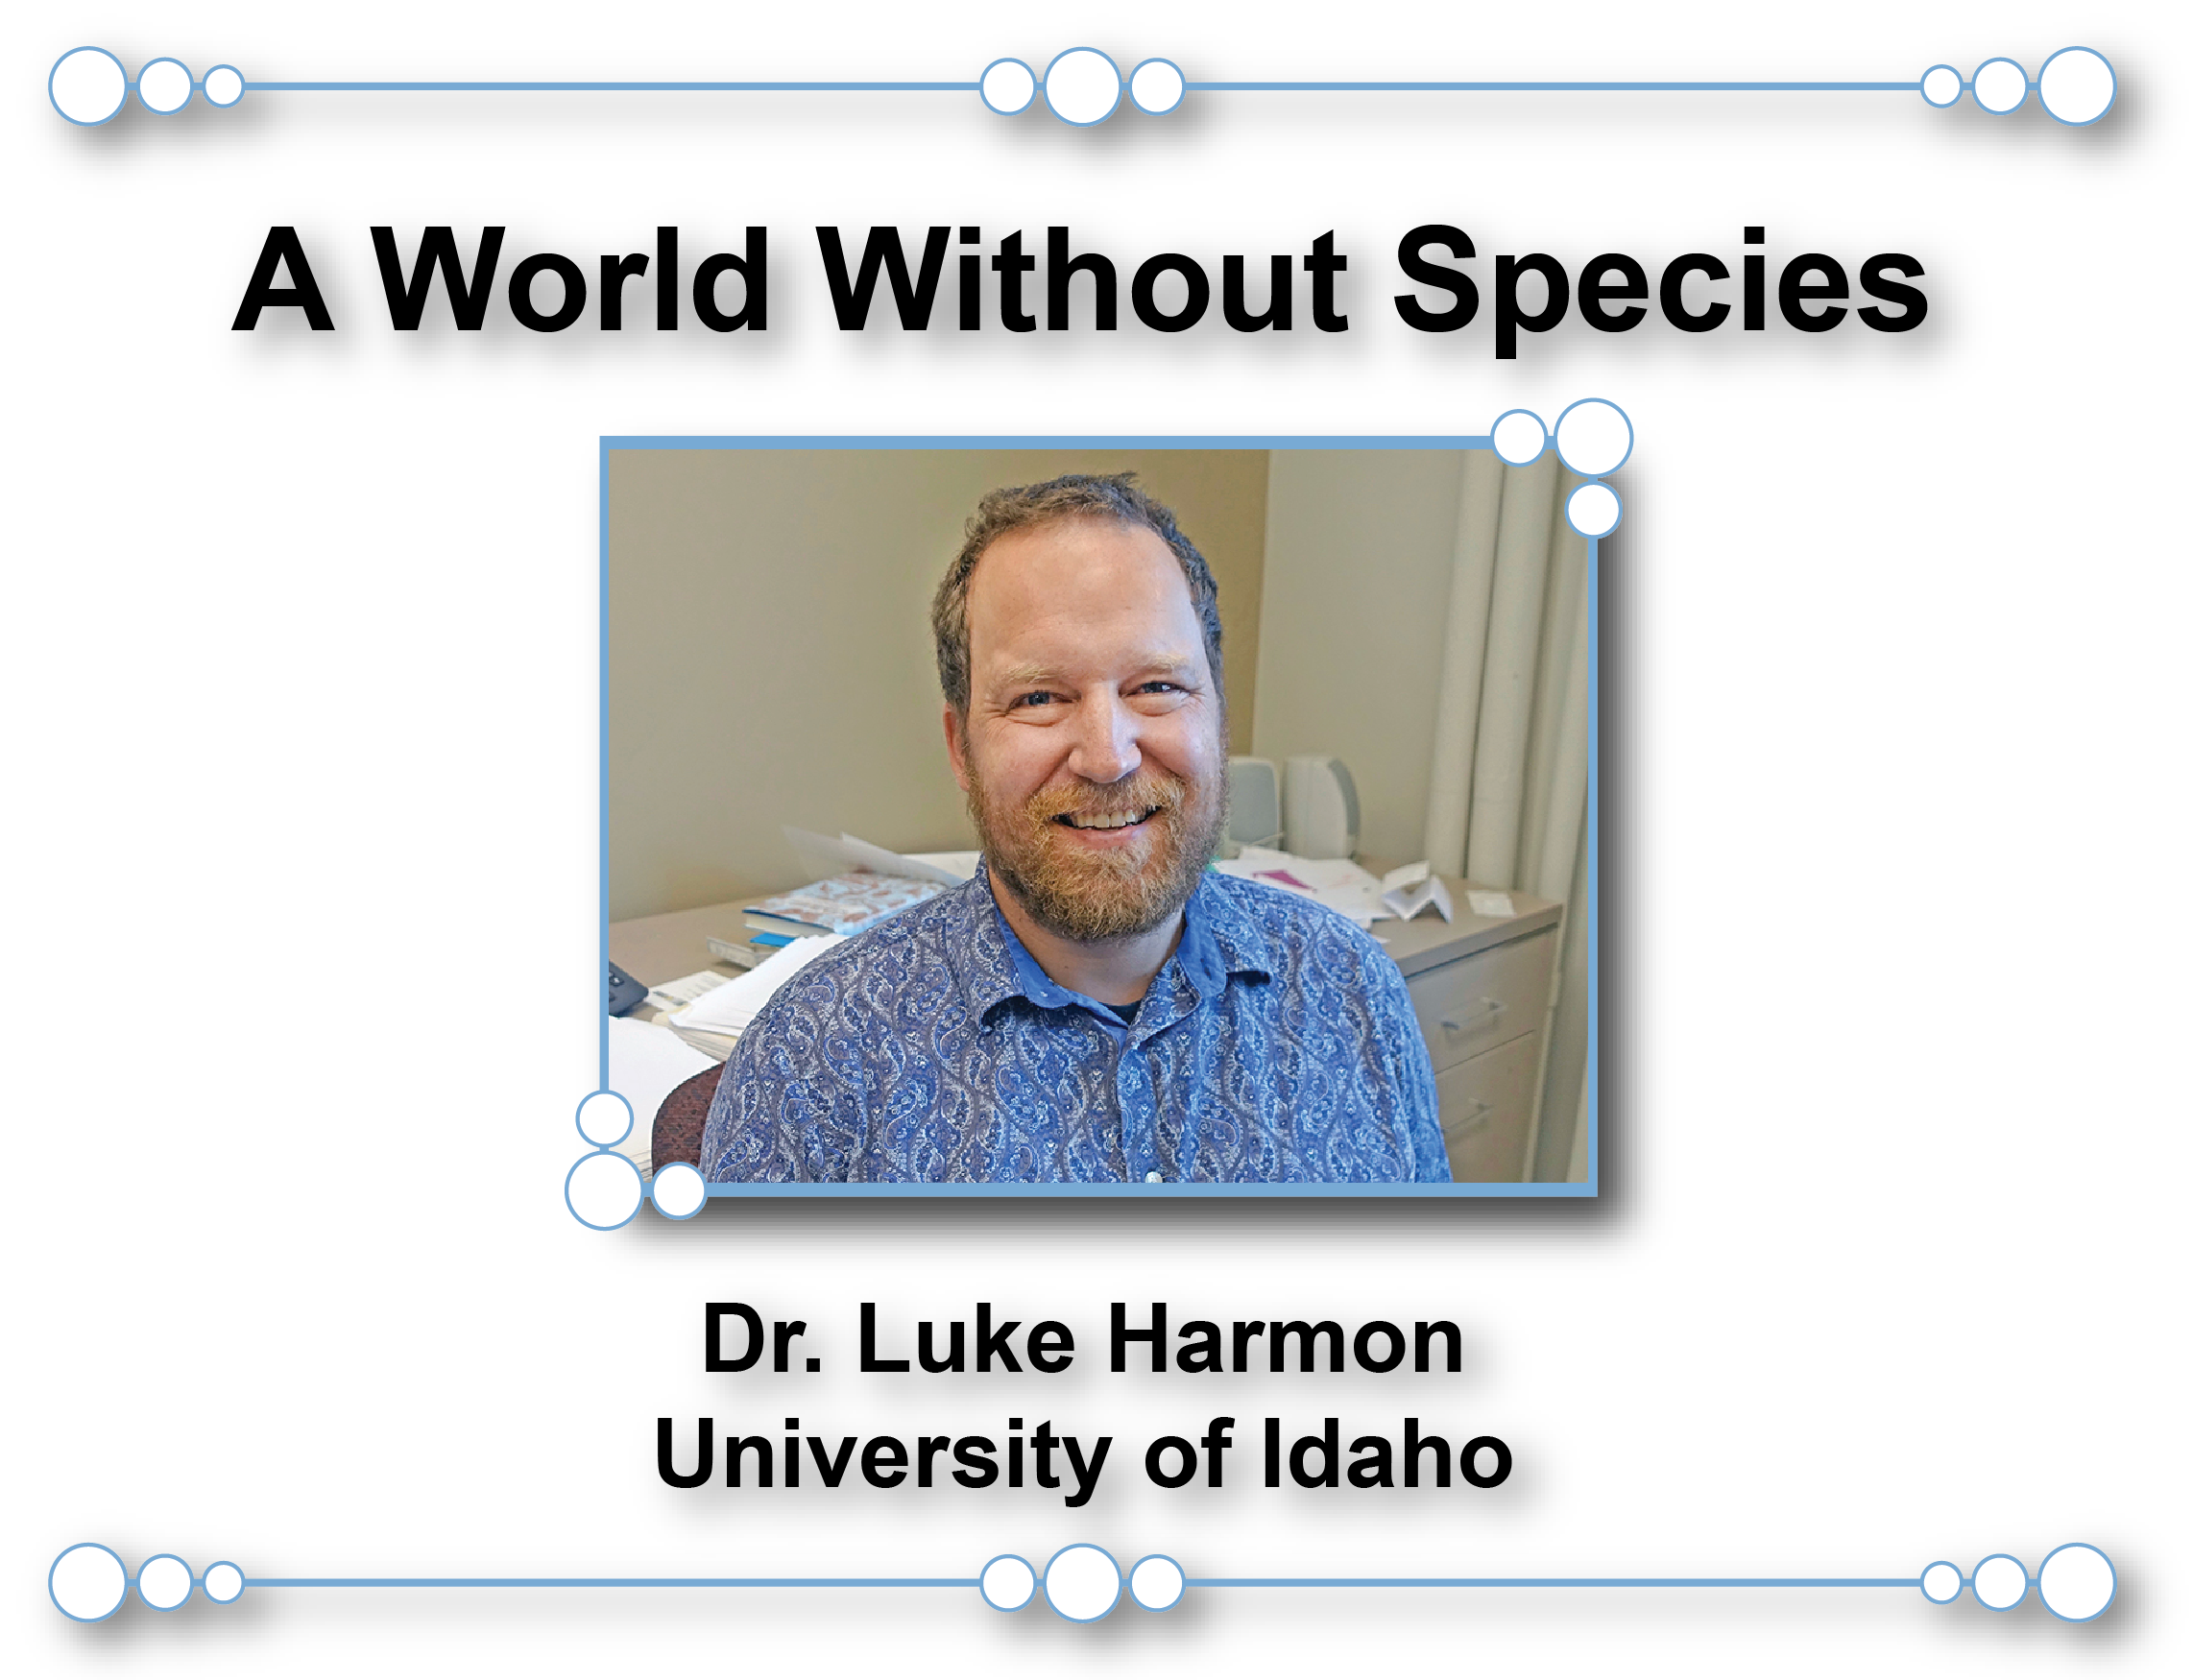 A flyer for an event entitled "A World Without Species" Dr. Luke Harmon University of Idaho